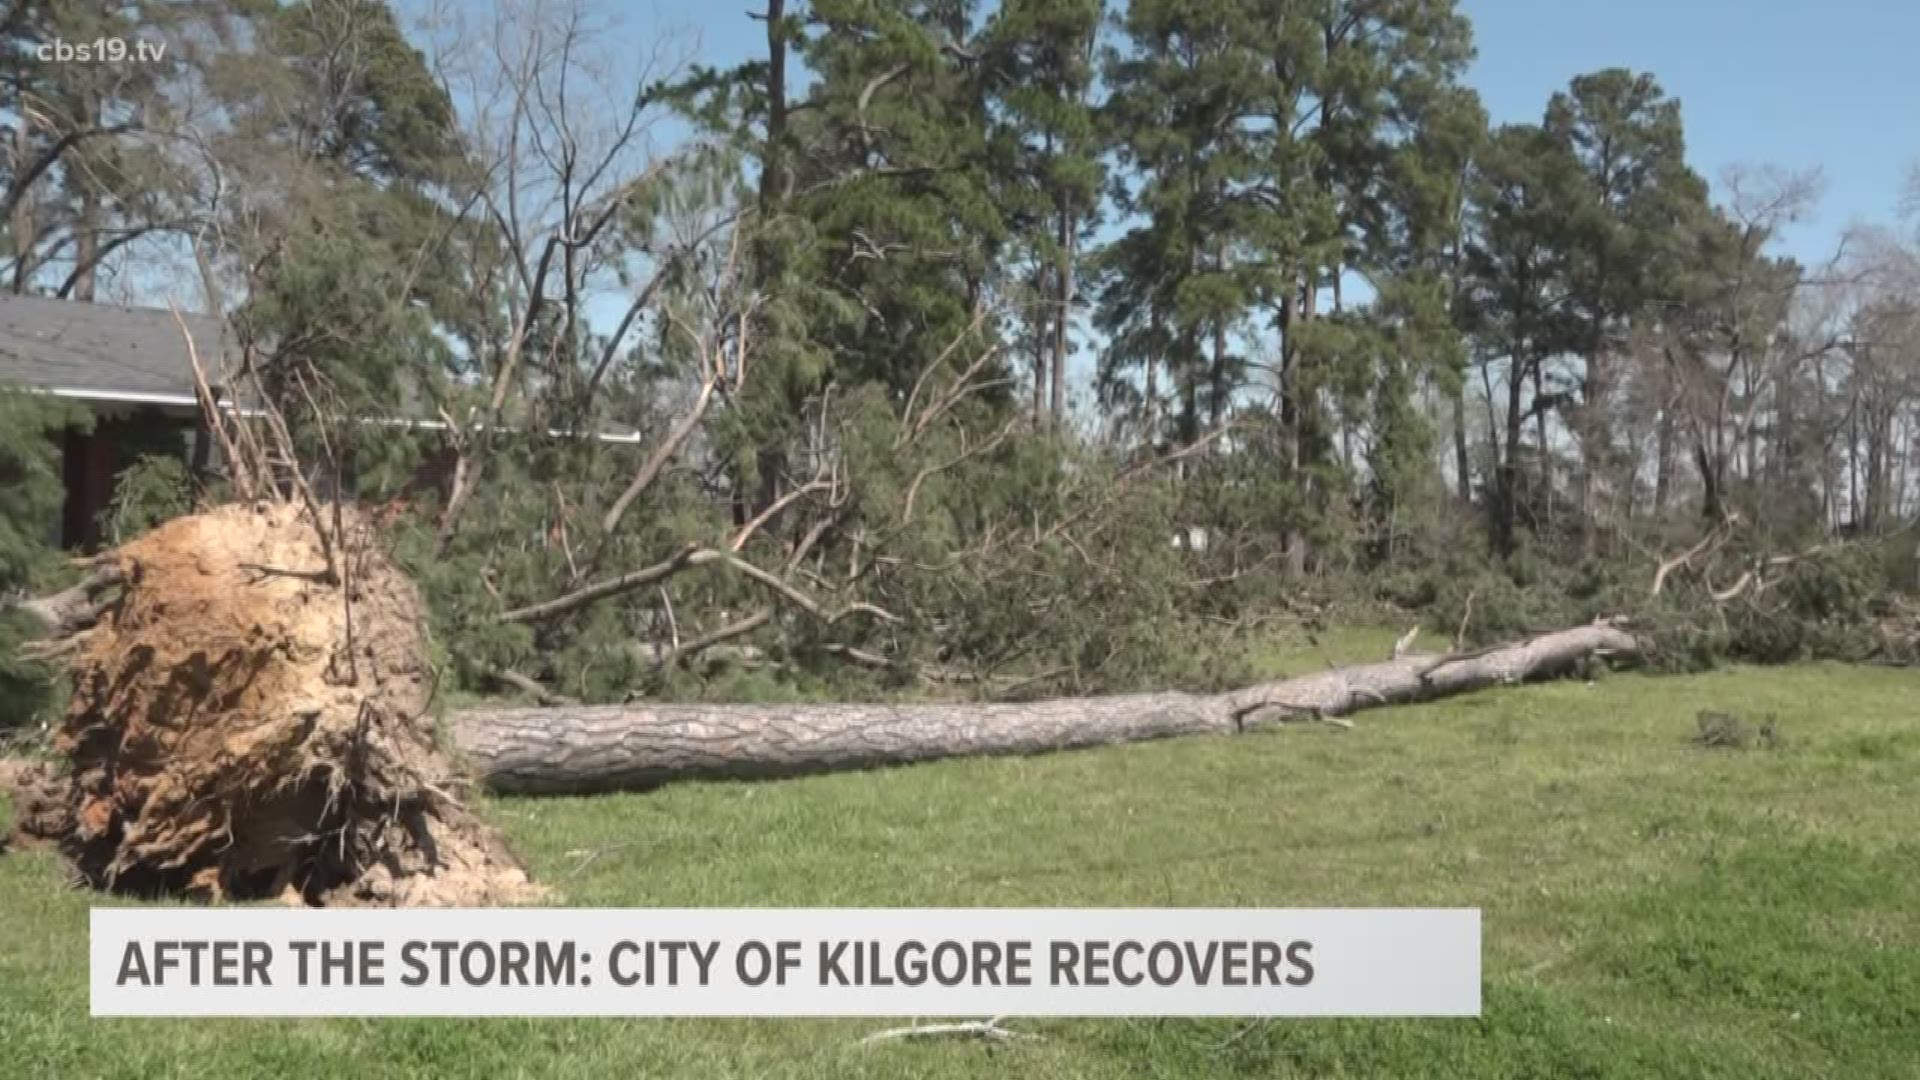 After the storm: city of Kilgore recovers